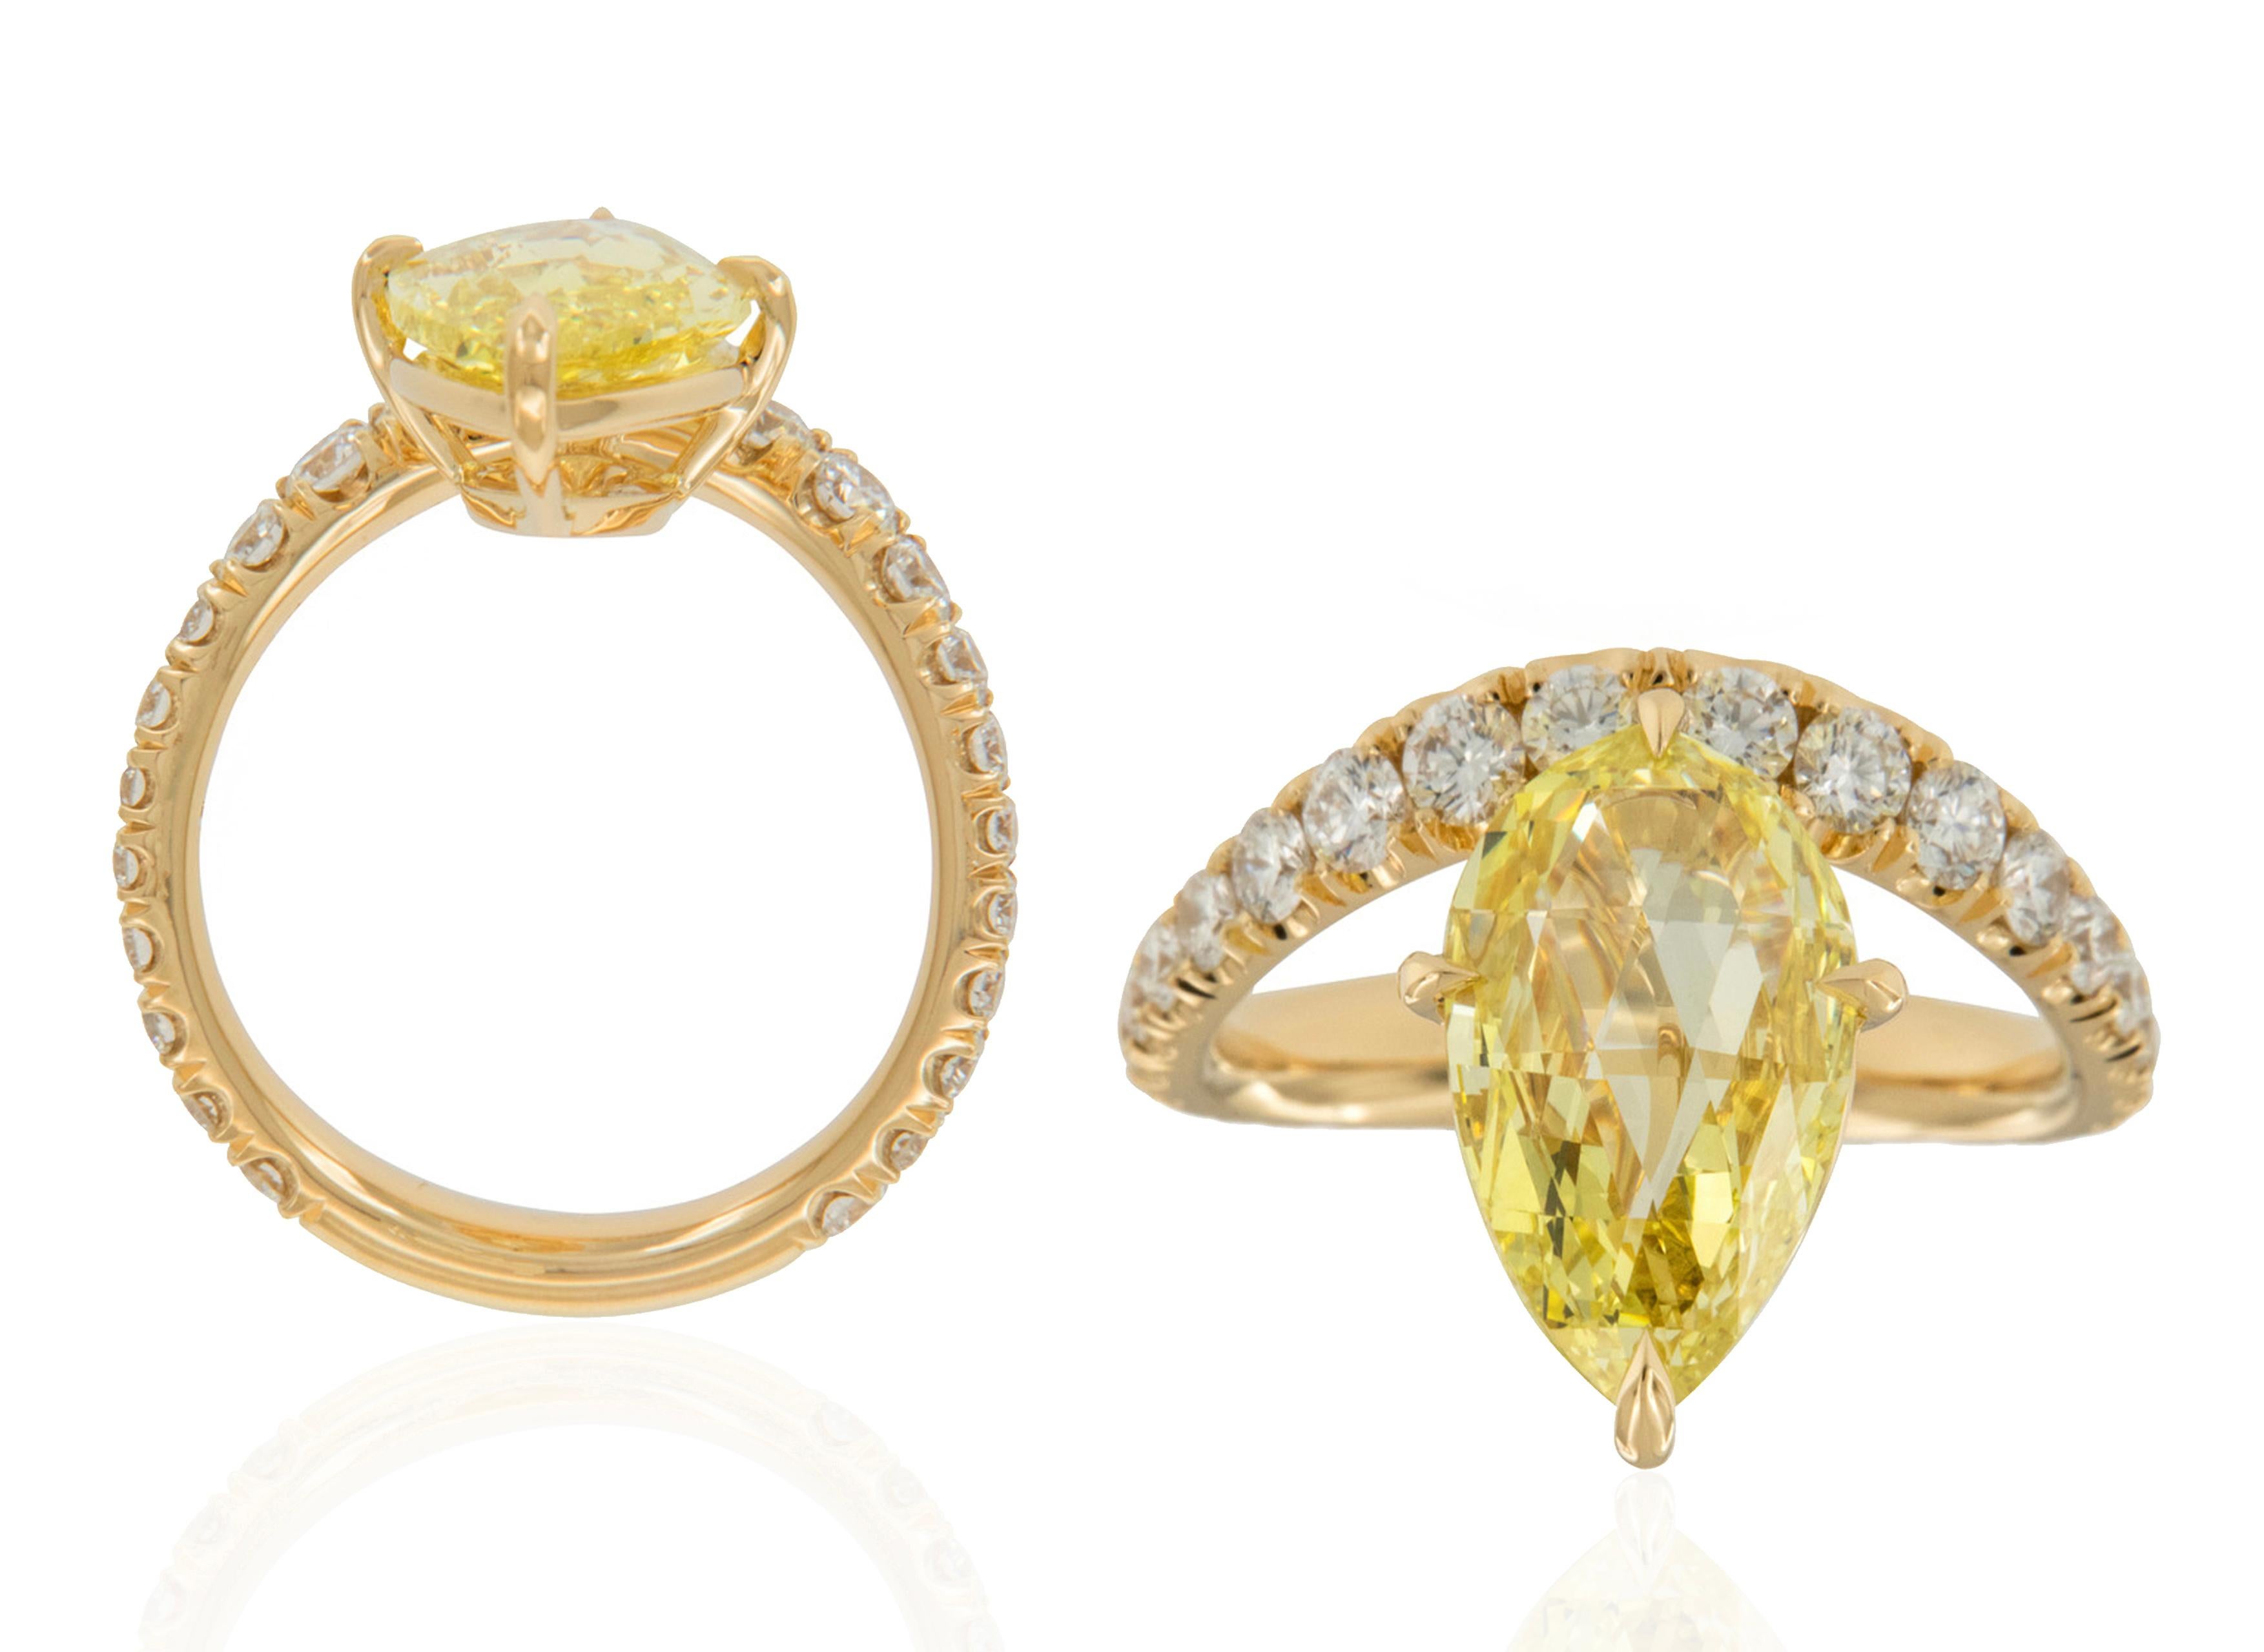 An exclusive, beautiful and elegant piece is this one of a kind Fancy Intense Yellow Diamond Briolette Cut Ring in 18K Yellow Gold, from our 'G-One' Collection. It will be a very important piece to have in your collection, and you will dazzle with